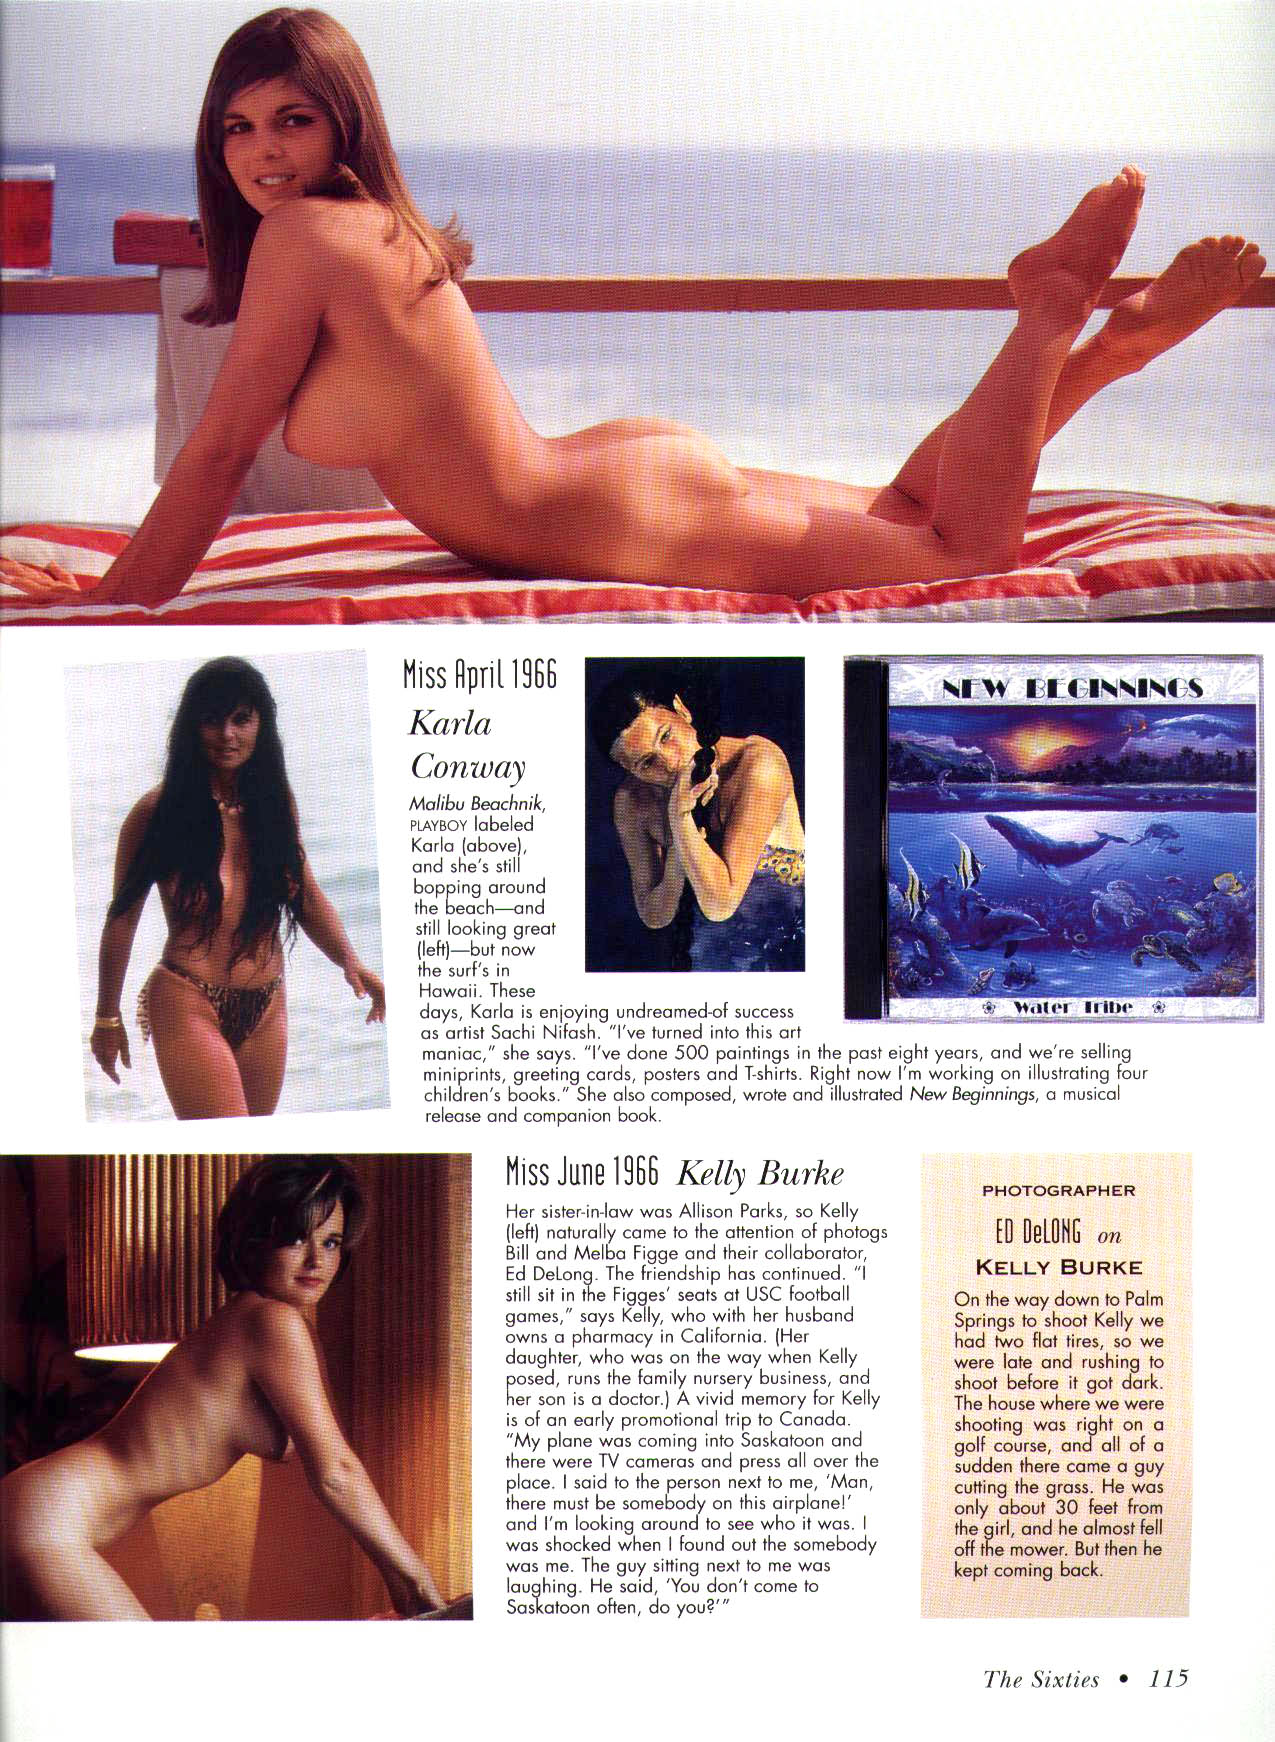 Playboy Playmates Karla Conway and Kelly Burke in The Playmate Book